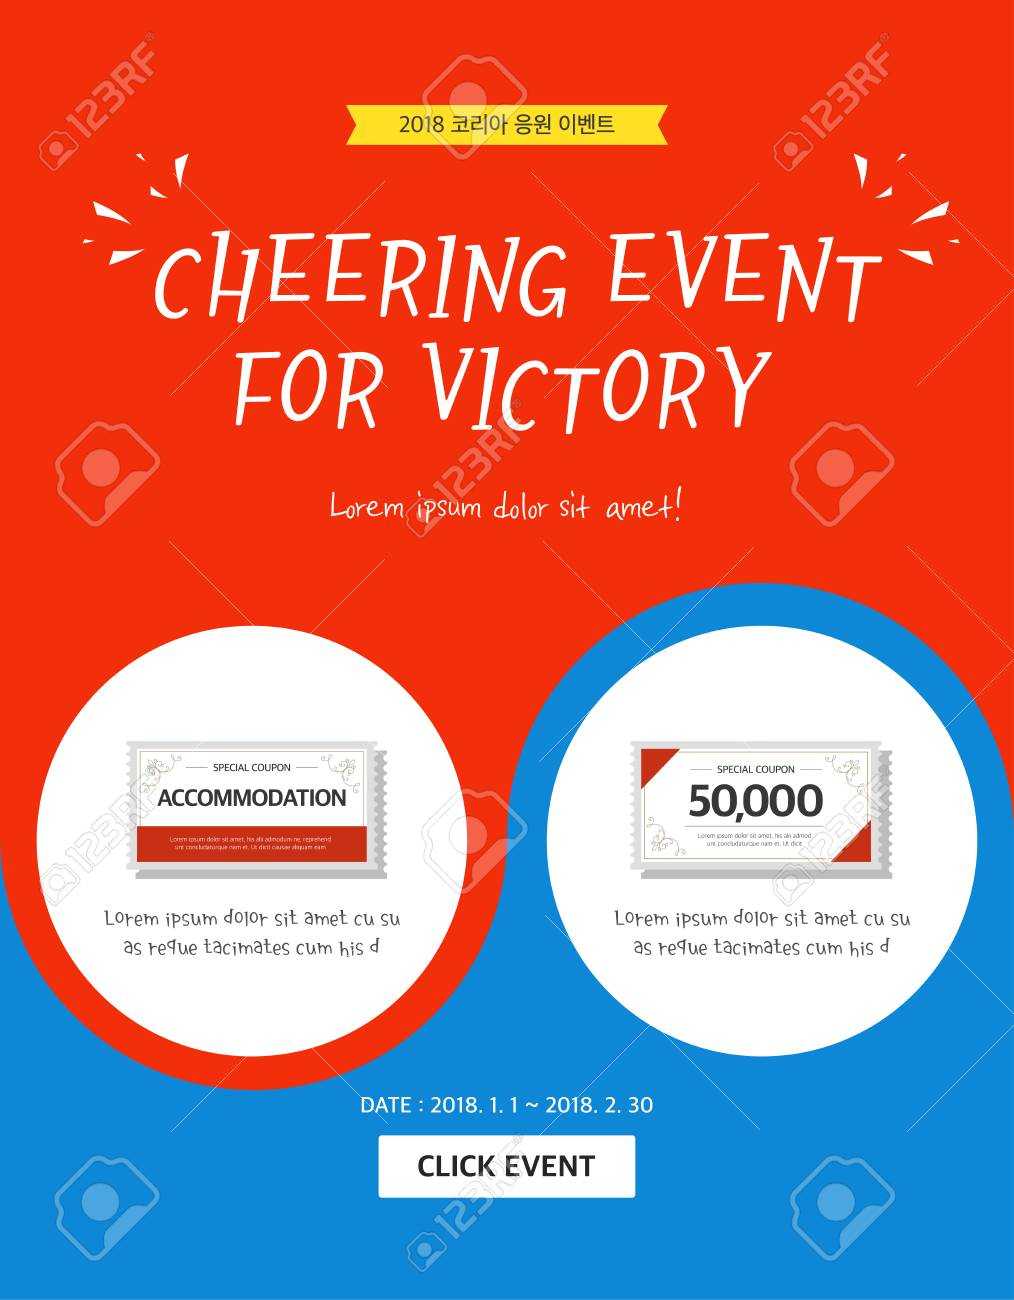 Event Banner Template – Cheering Event For Victory With Event Banner Template